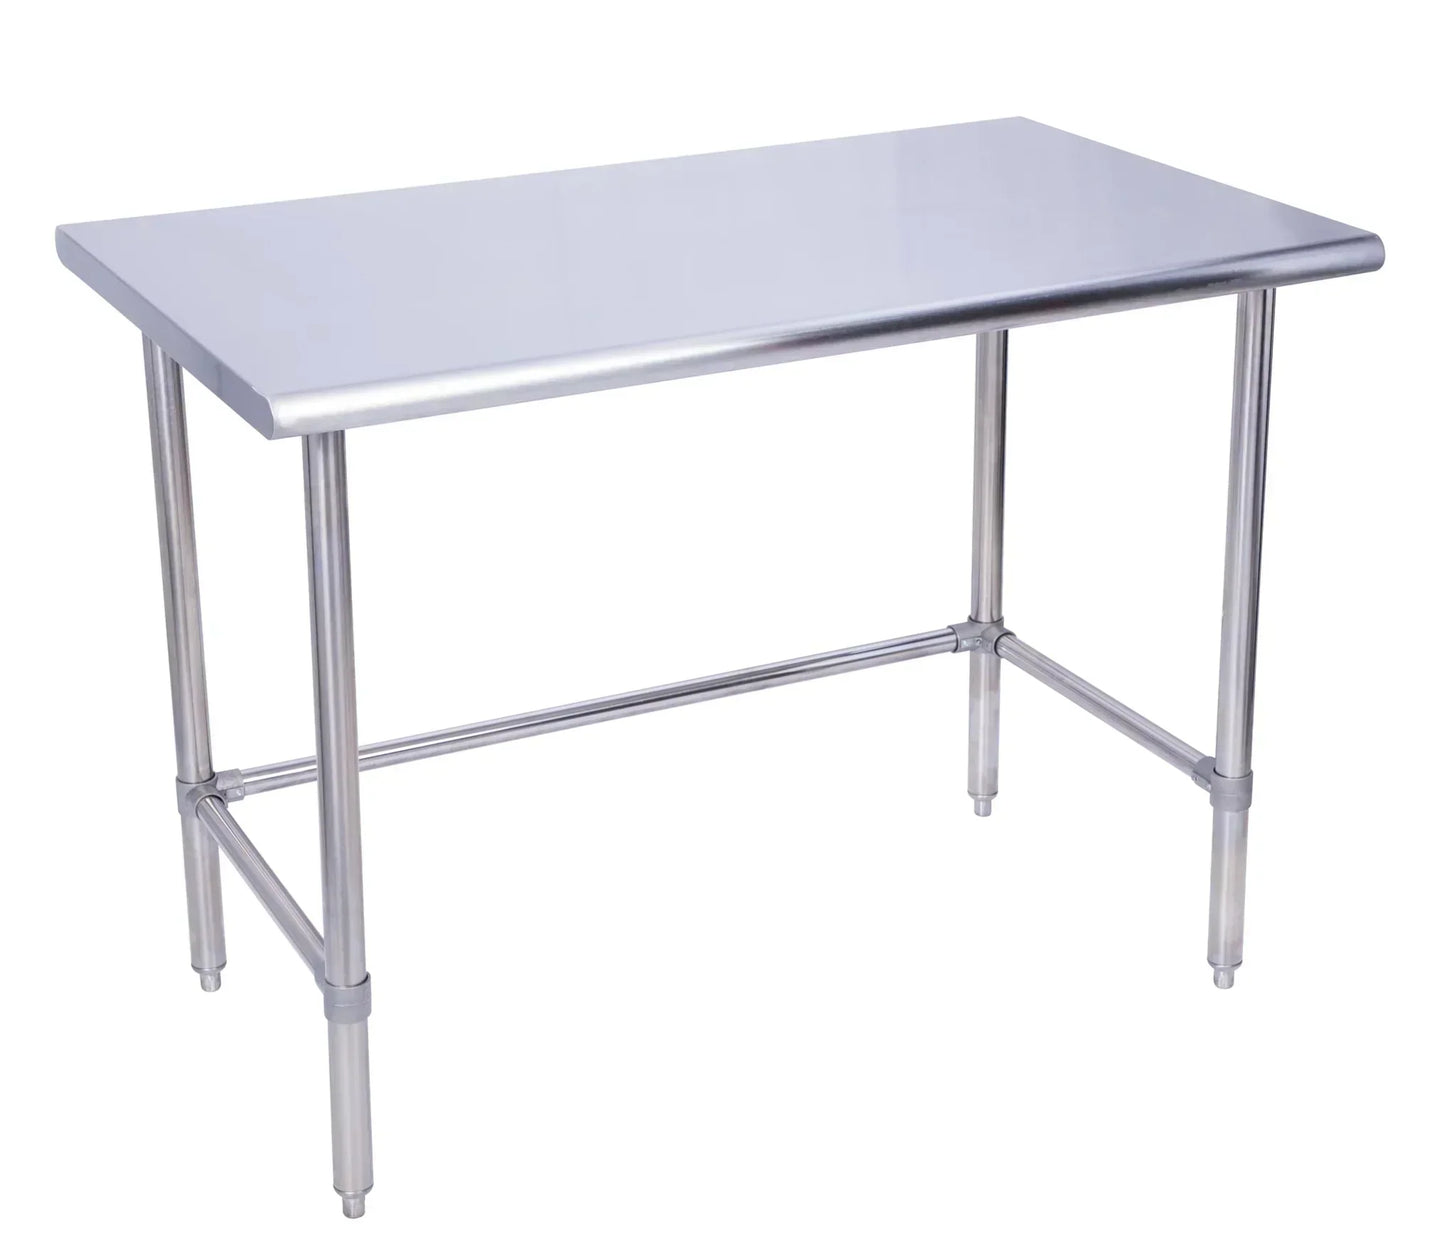 KCS WSCB-3072 30" x 72" Stainless Steel Work Table With Cross Bar